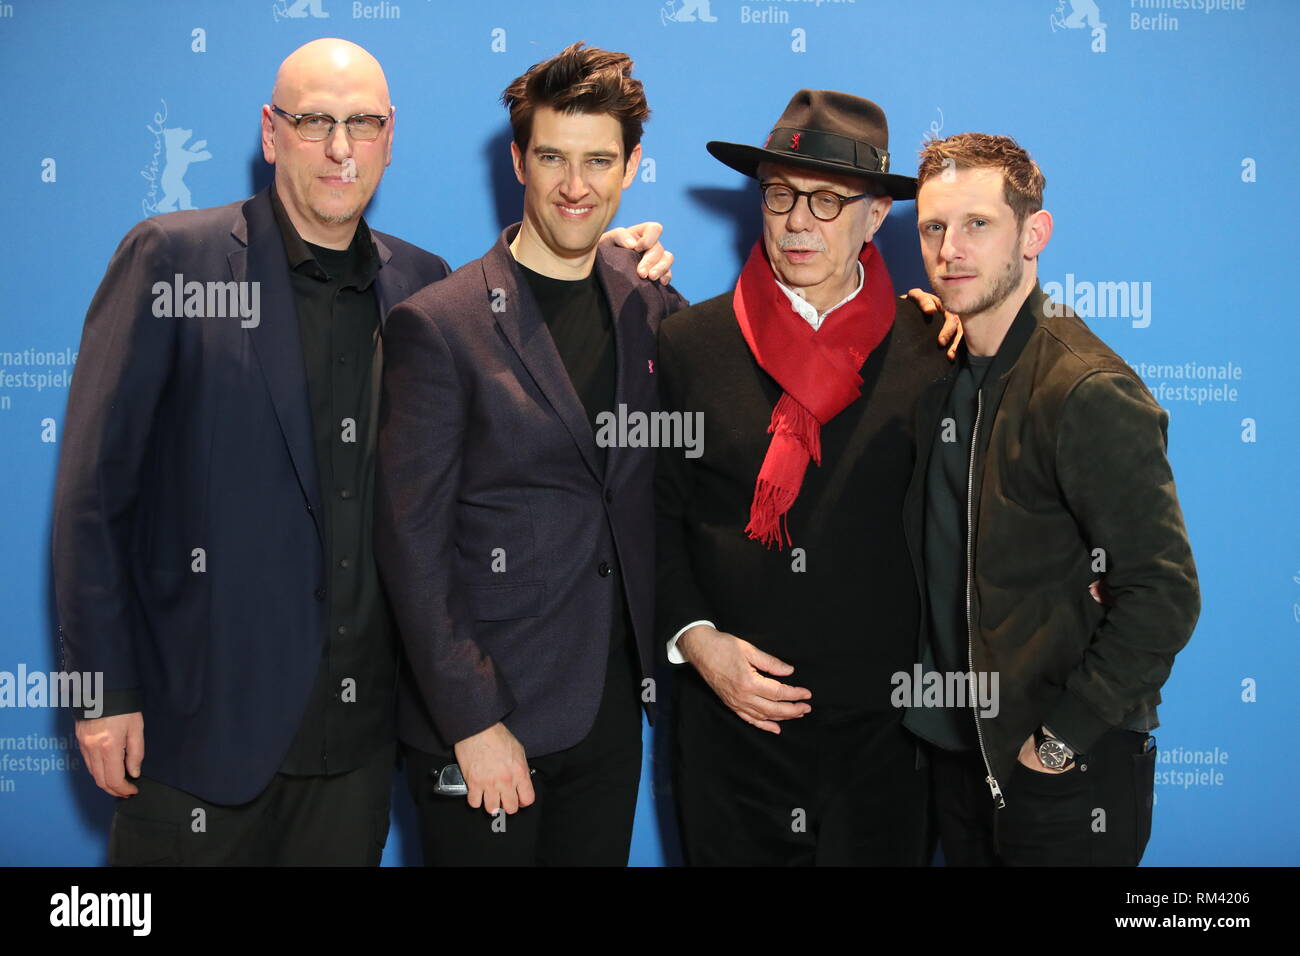 Berlin, Germany. 11th Feb, 2019. 69th Berlinale, Photocall 'Skin', USA, Panorama: Oren Moverman, producer (l-r), Guy Nattiv, director and screenwriter, Berlinale director Dieter Kosslick and Jamie Bell, British actor. Credit: Christof Soeder/dpa/Alamy Live News Stock Photo